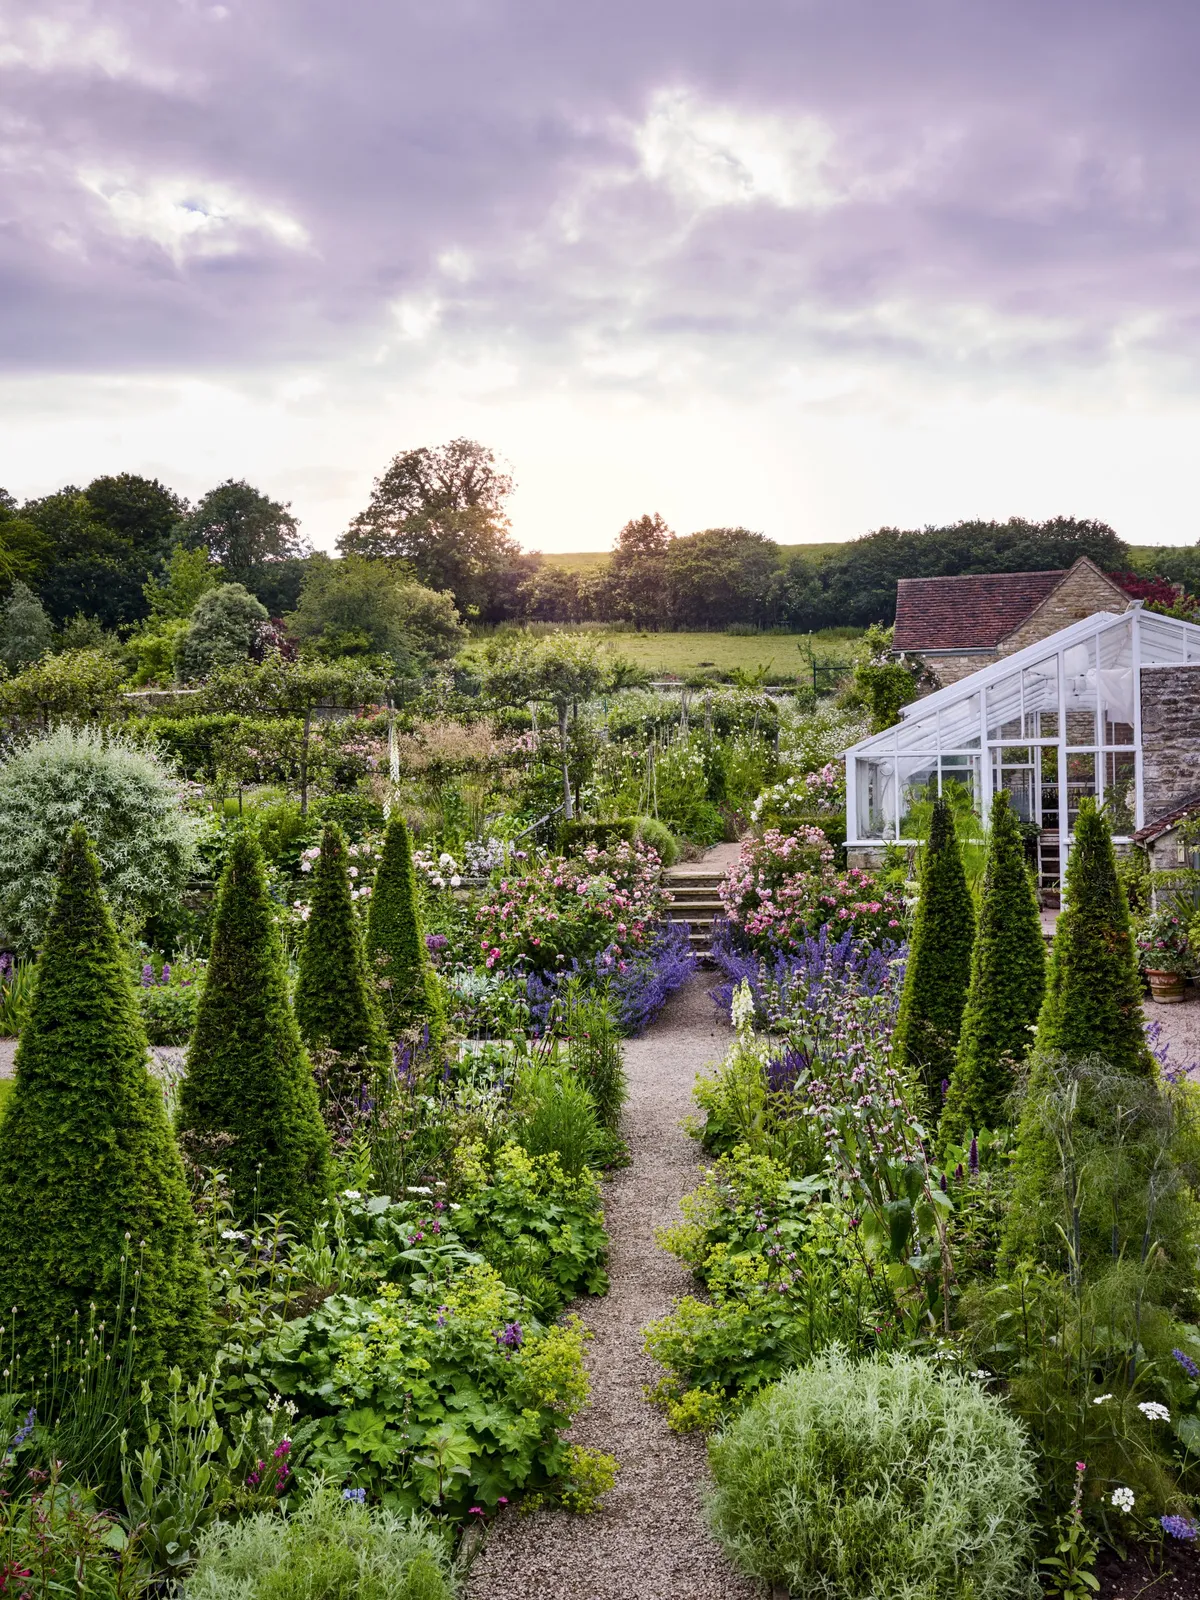 Batcombe House garden, designed by Libby Russell